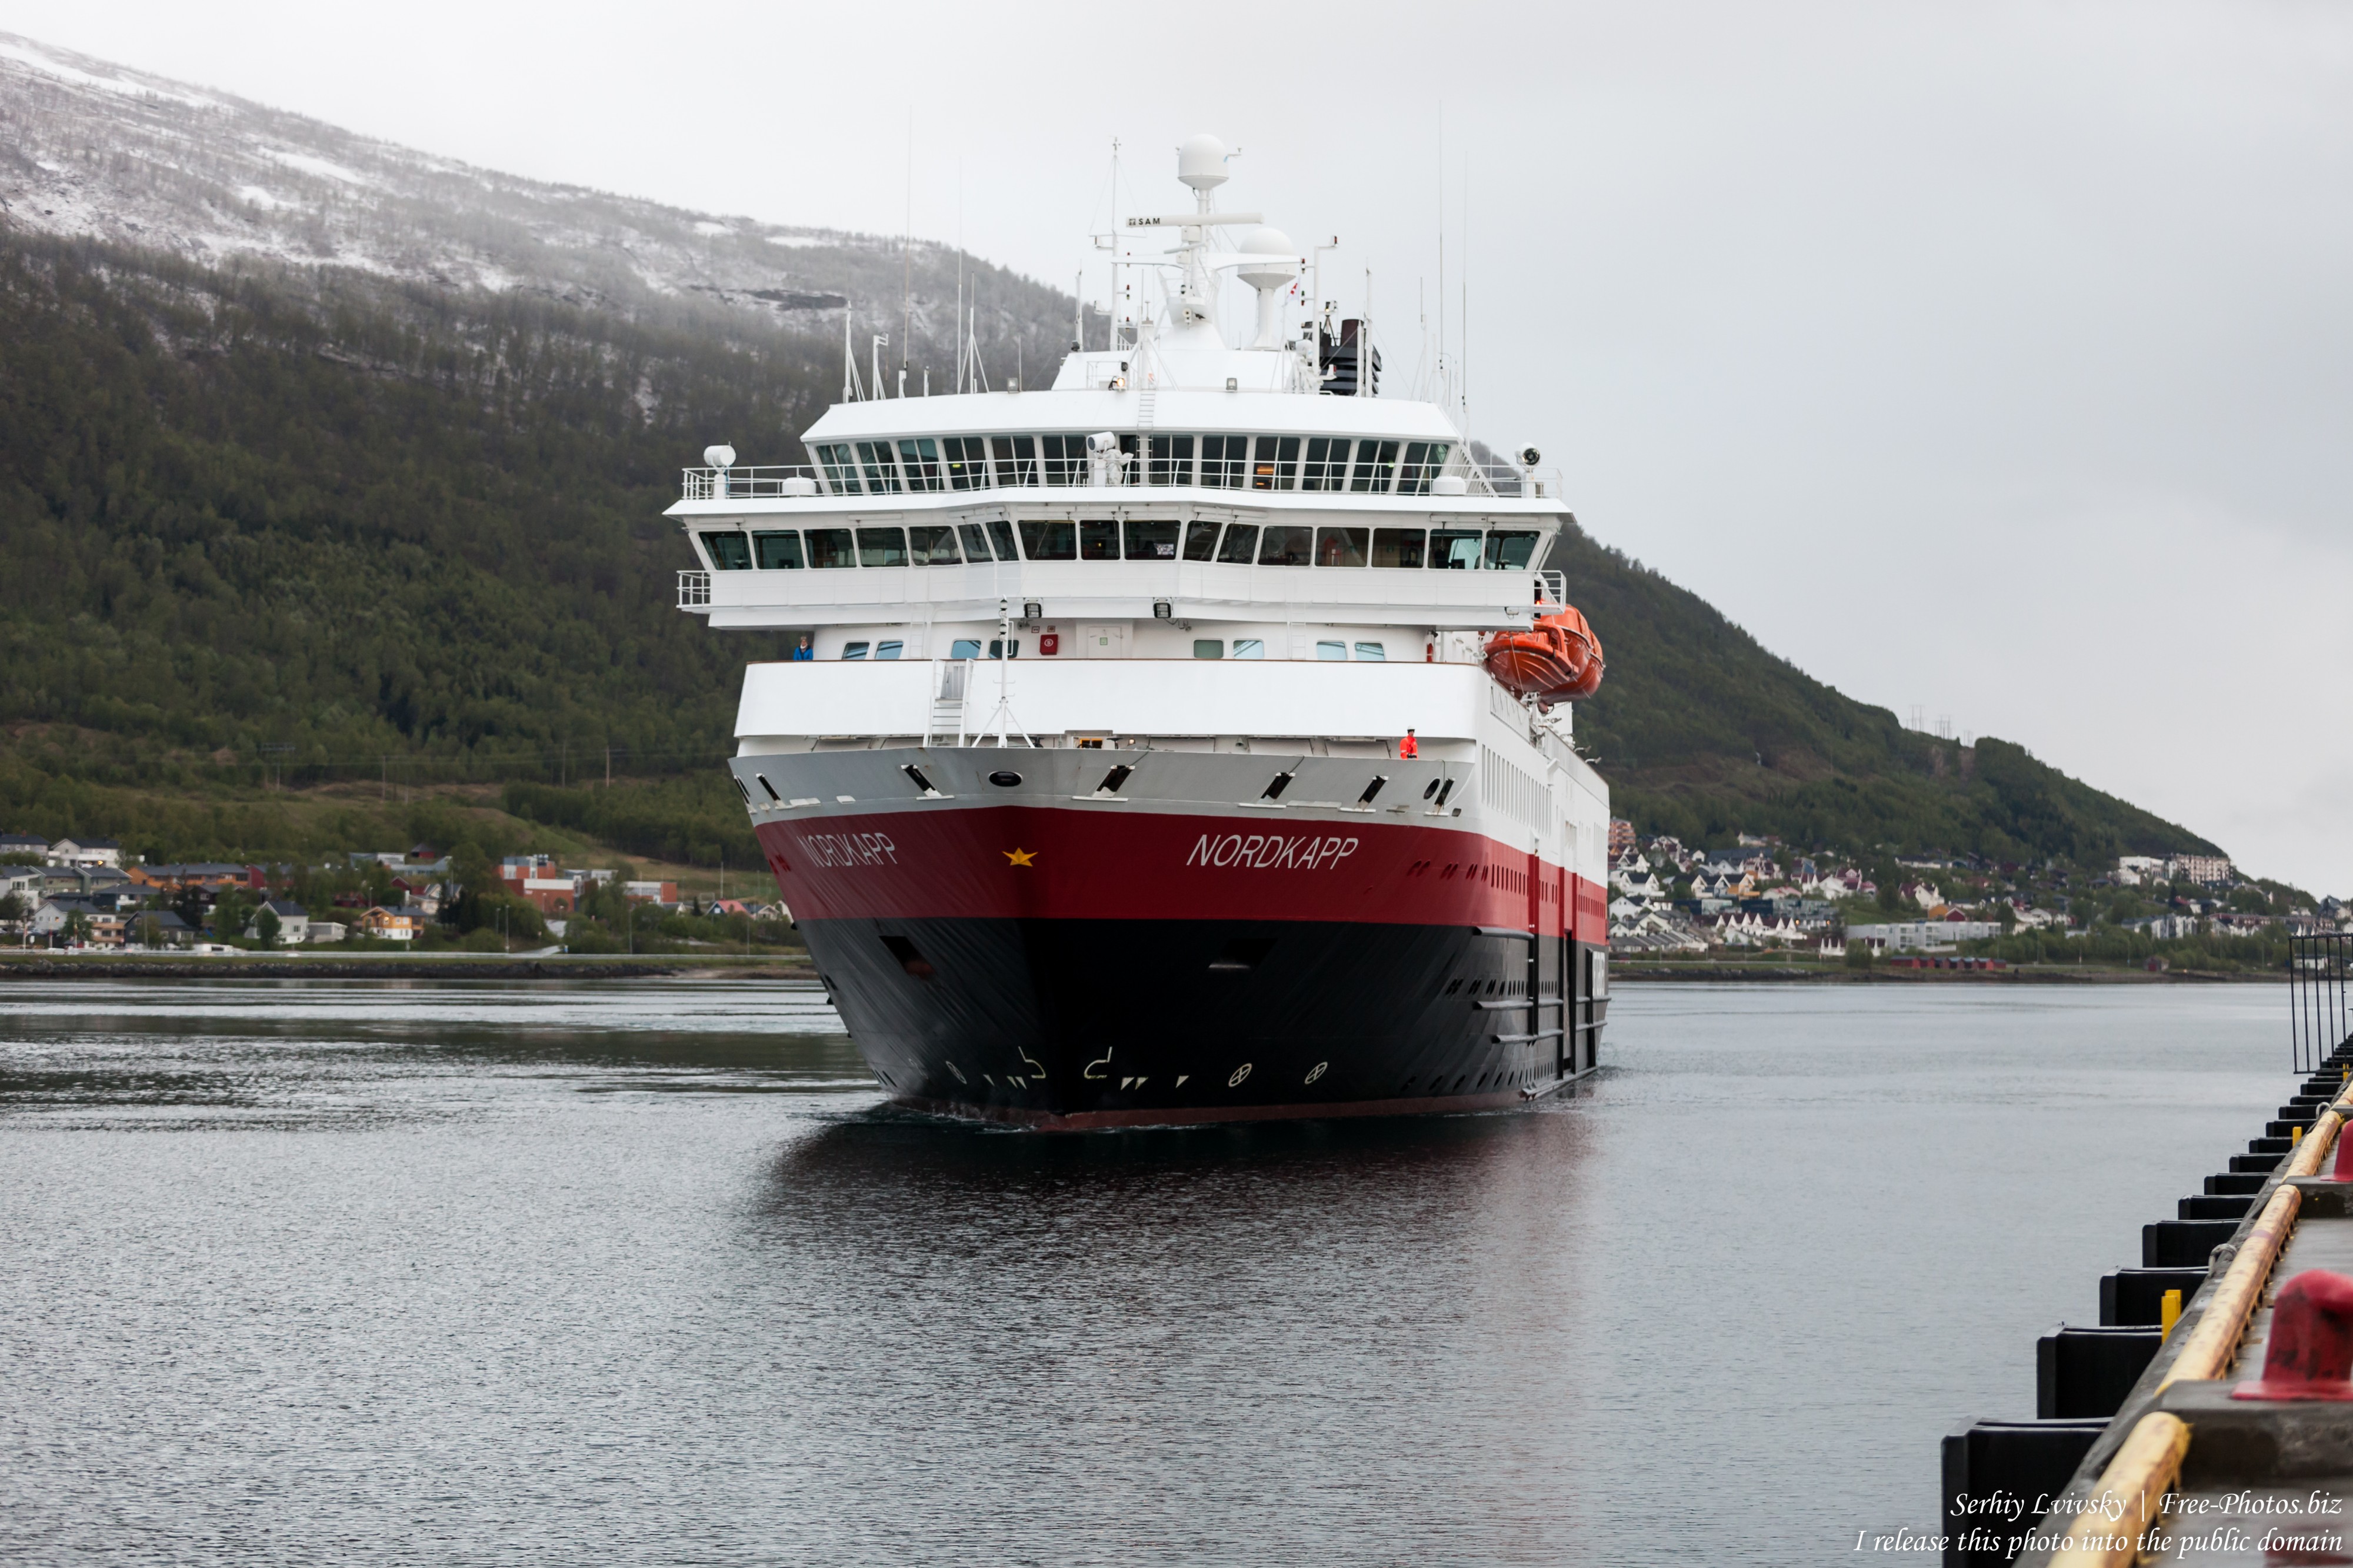 Tromso, Norway, photographed in June 2018 by Serhiy Lvivsky, picture 17